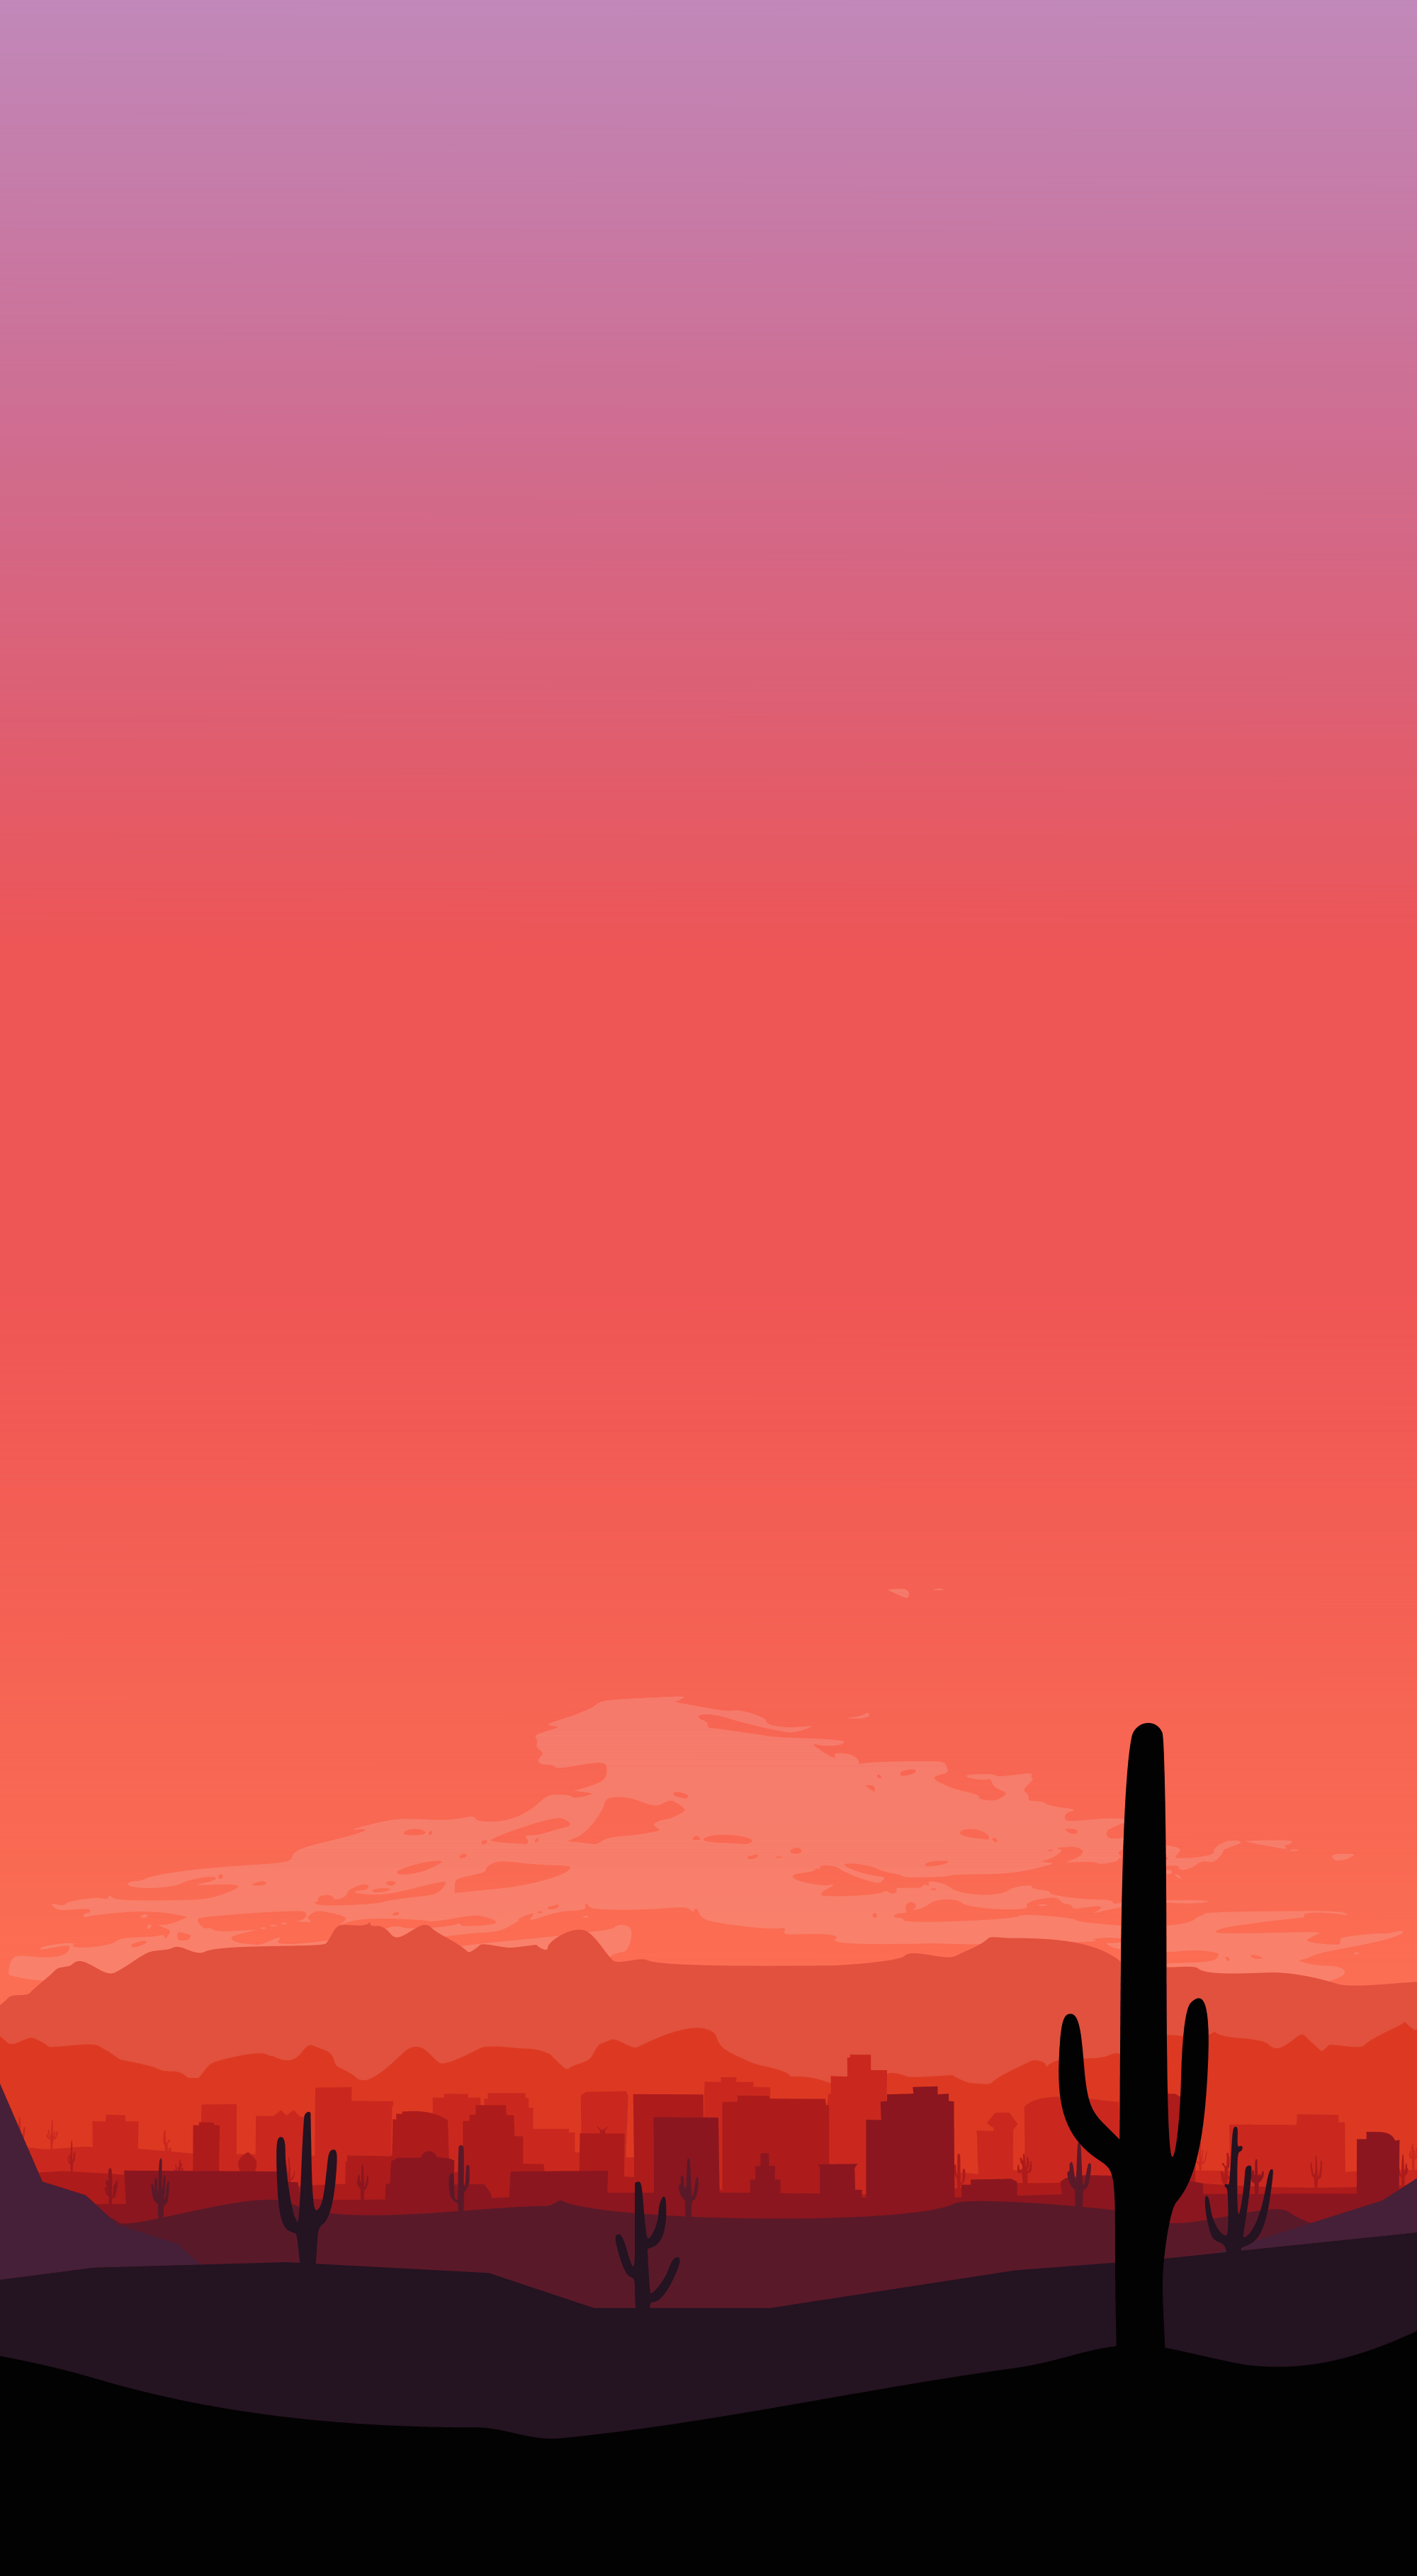 I created an iPhone wallpaper for your city